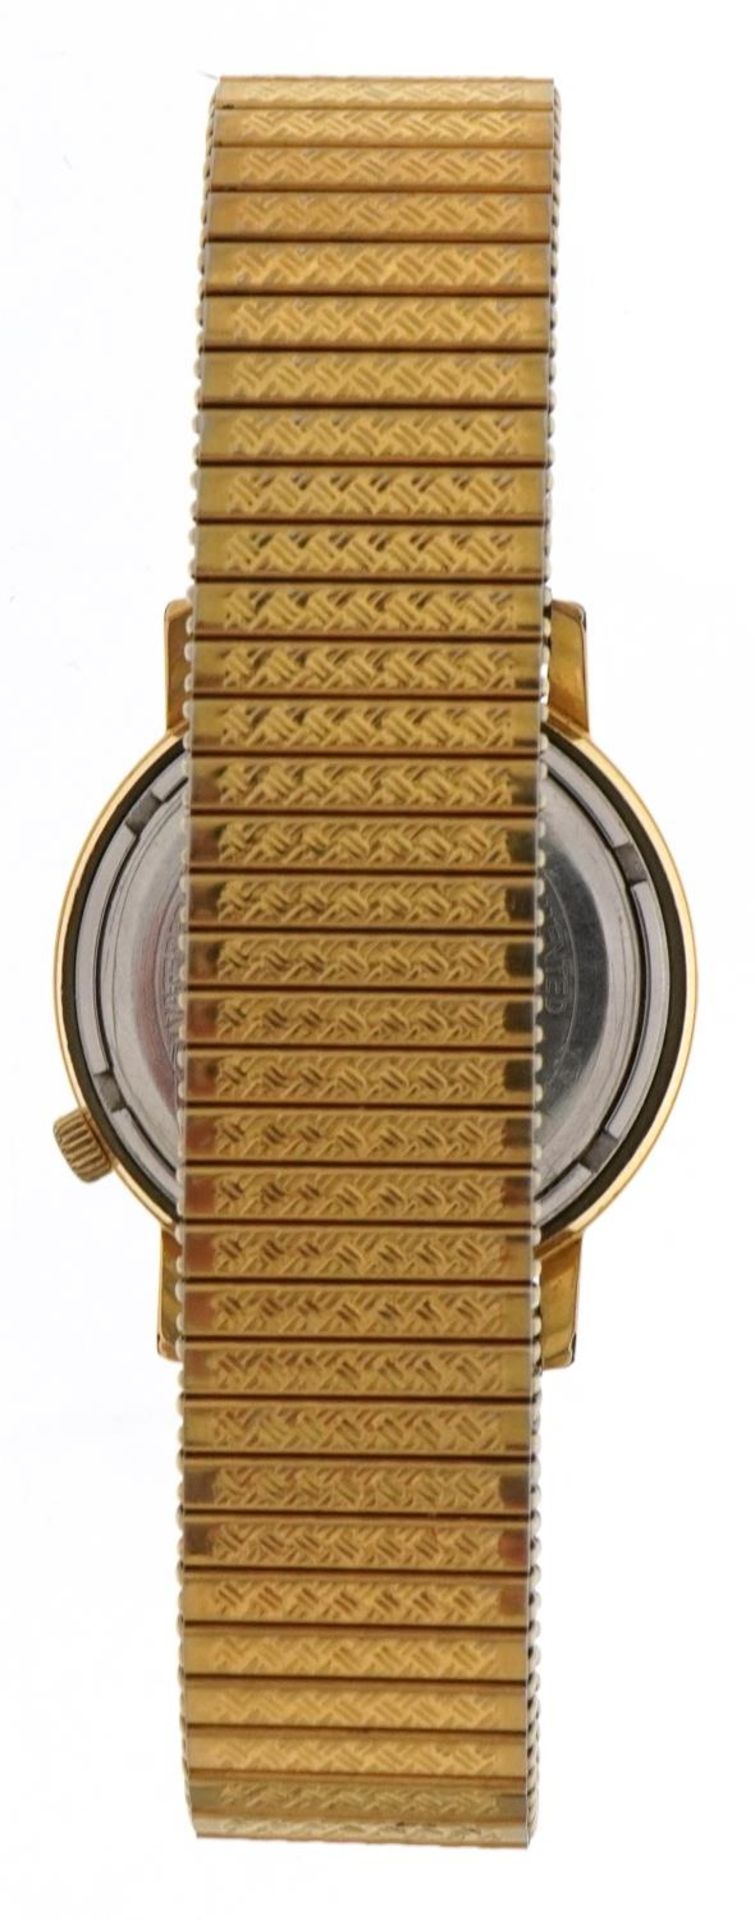 Bulova, gentlemen's Bulova Accutron wristwatch with date aperture, the case numbered 1-631171, - Image 3 of 5